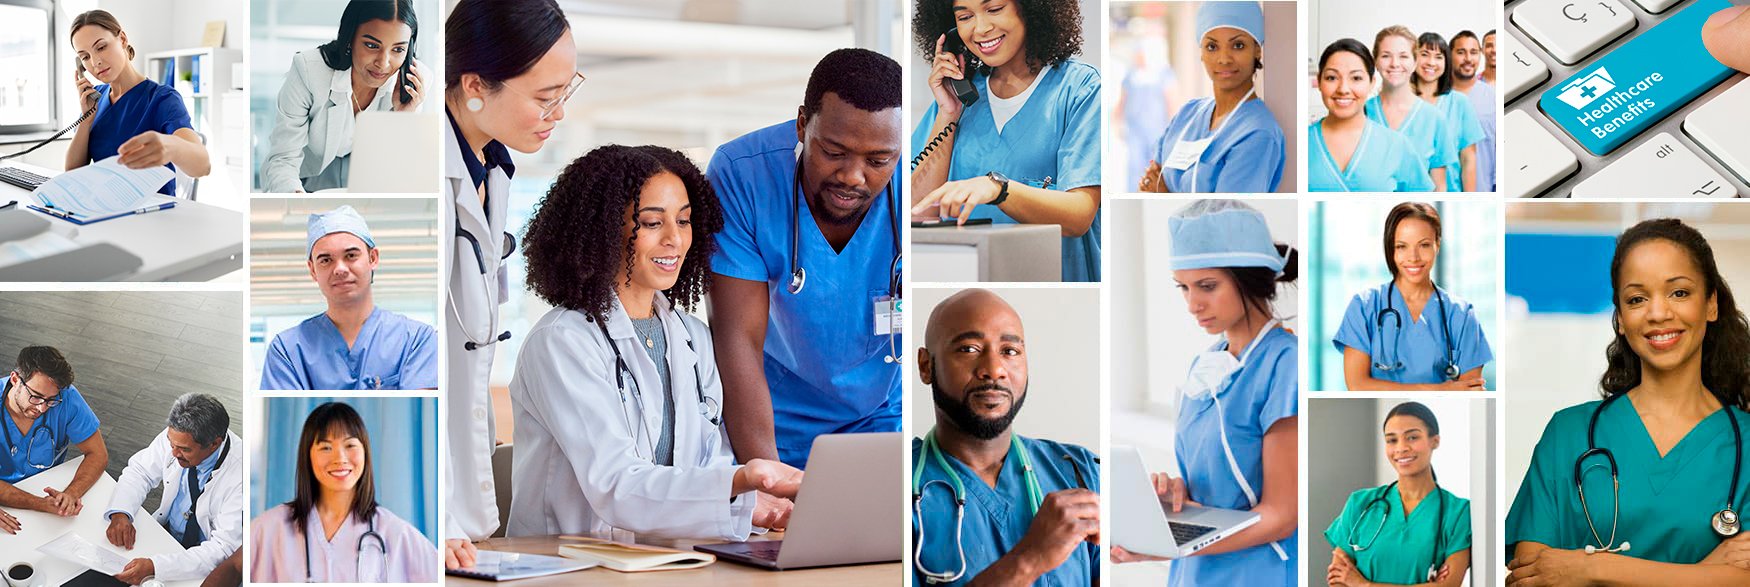 A collage of doctors and nurses answering the phone, talking to each other, looking straight forward, and a blue healthcare keyboard image. vcpstaff.com | Healthcare Staffing